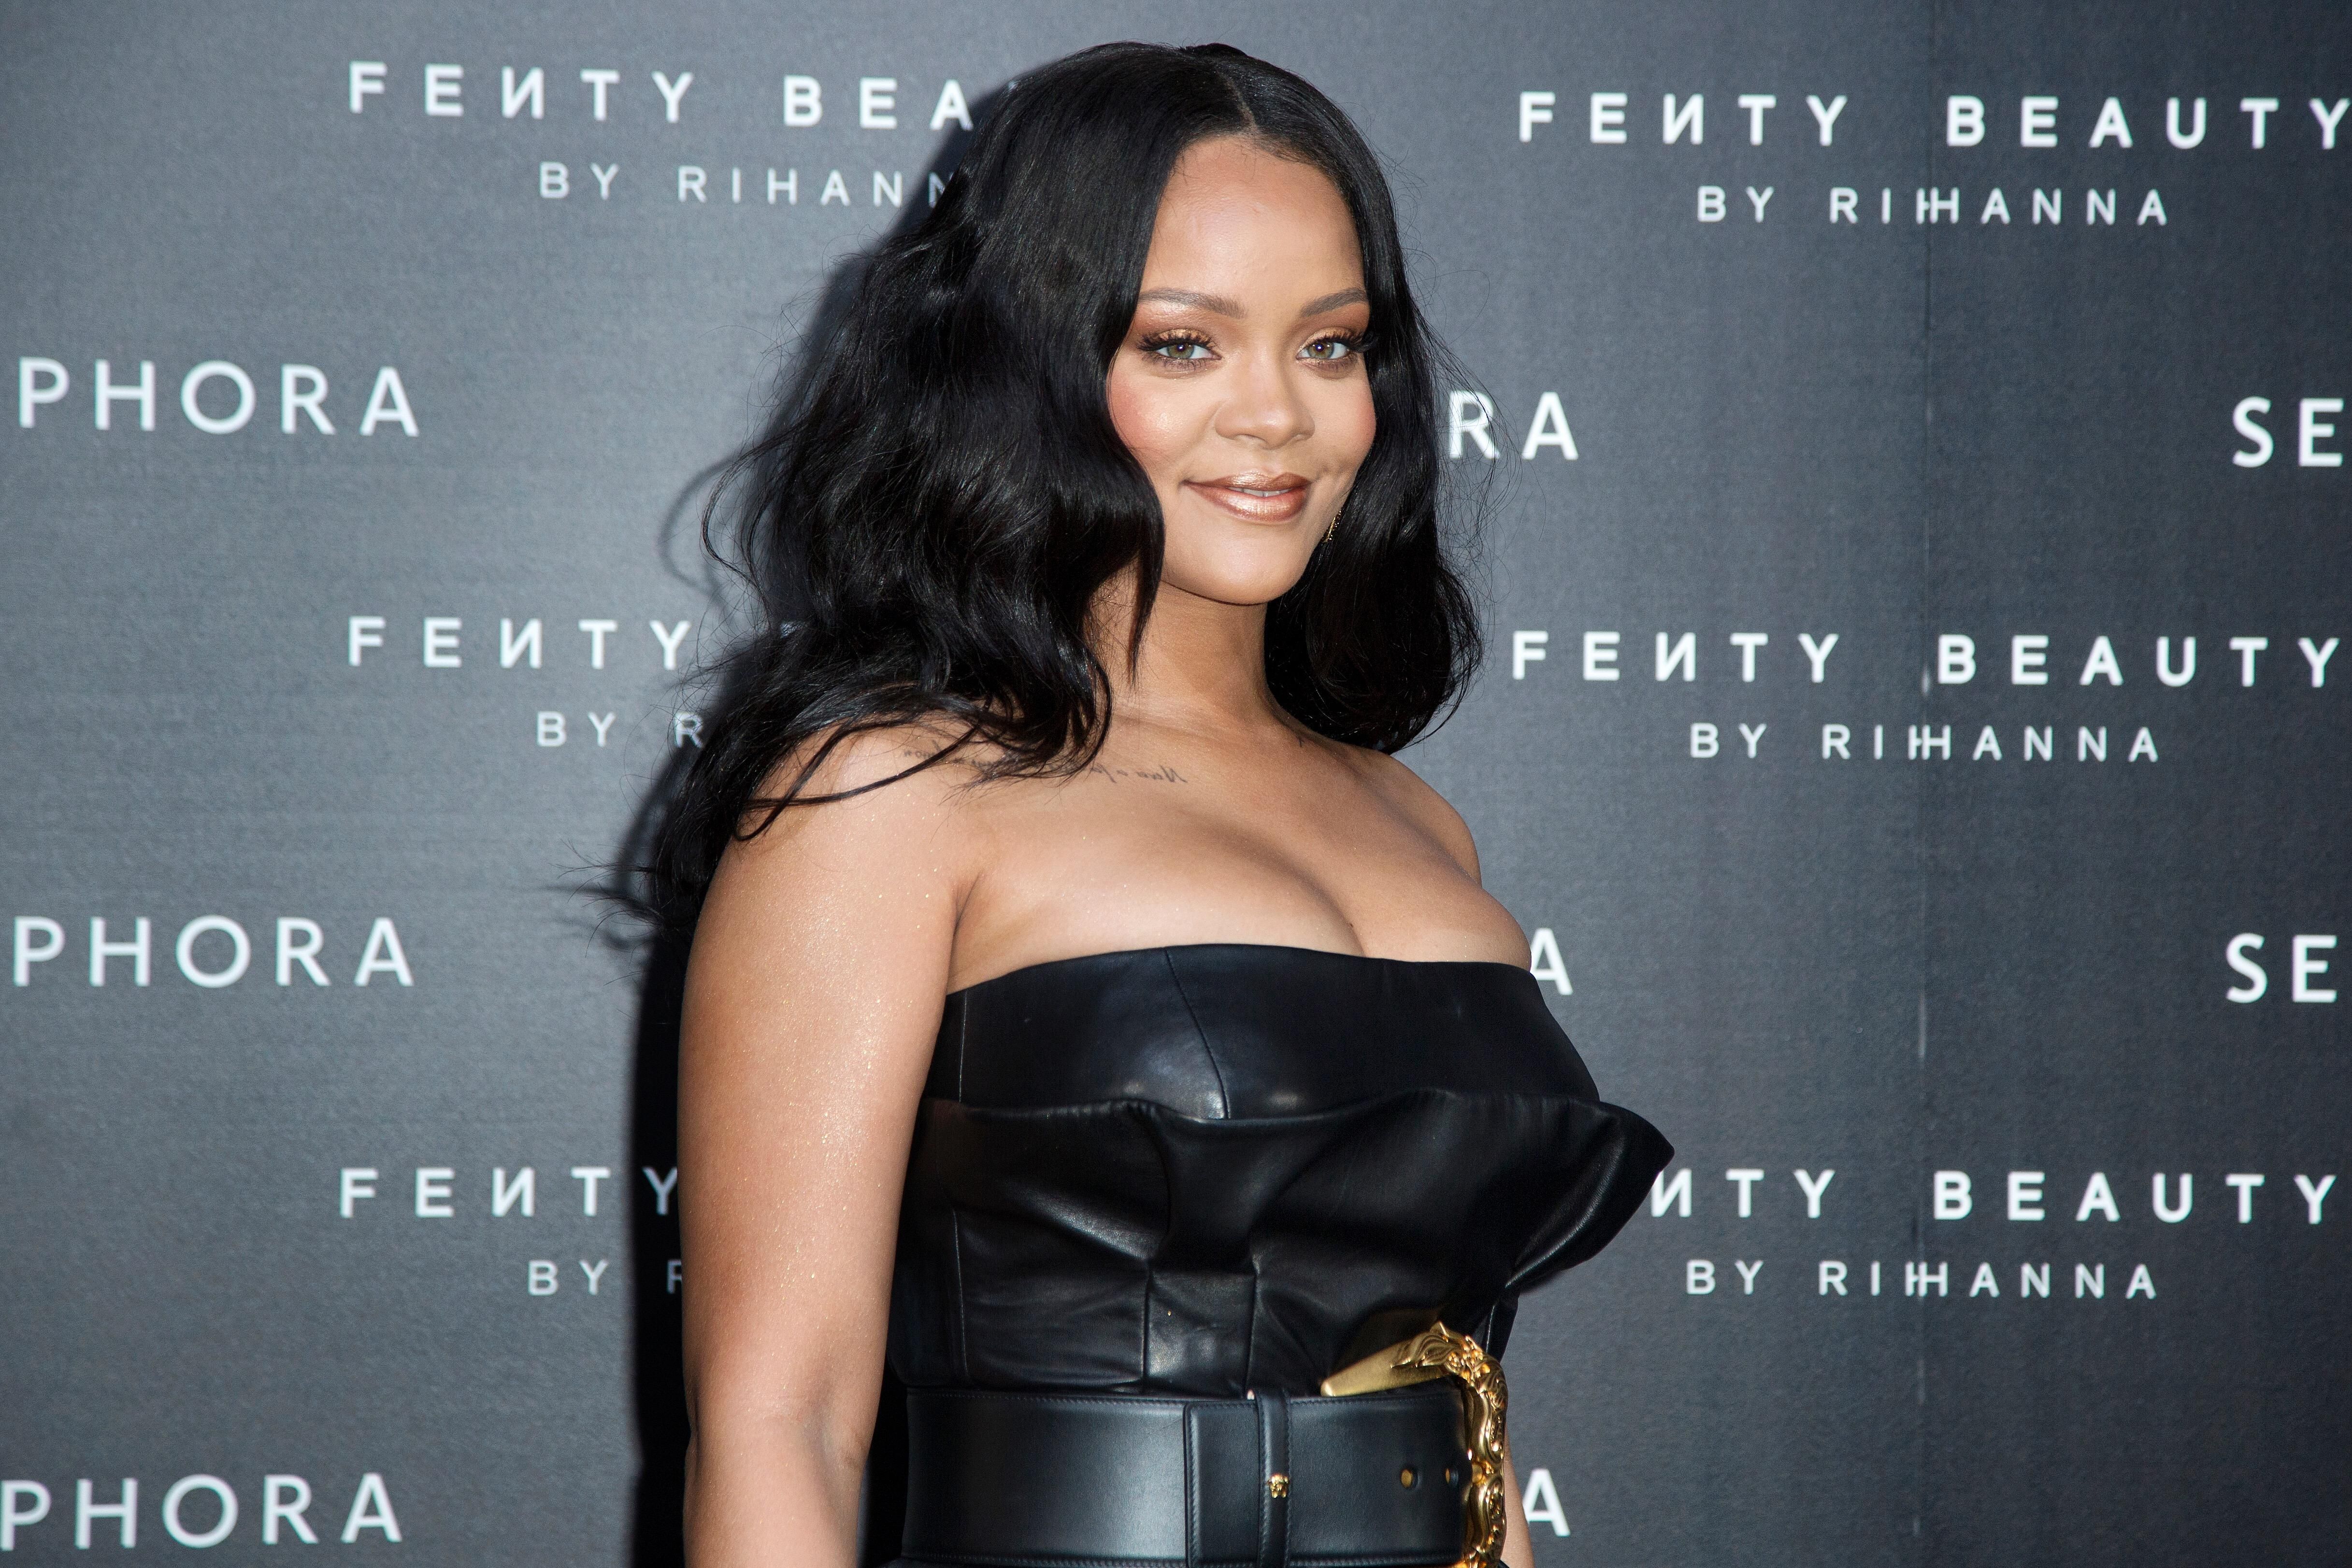 People Are Losing Their Fucking Minds Over Rihanna's Fenty Beauty Ad